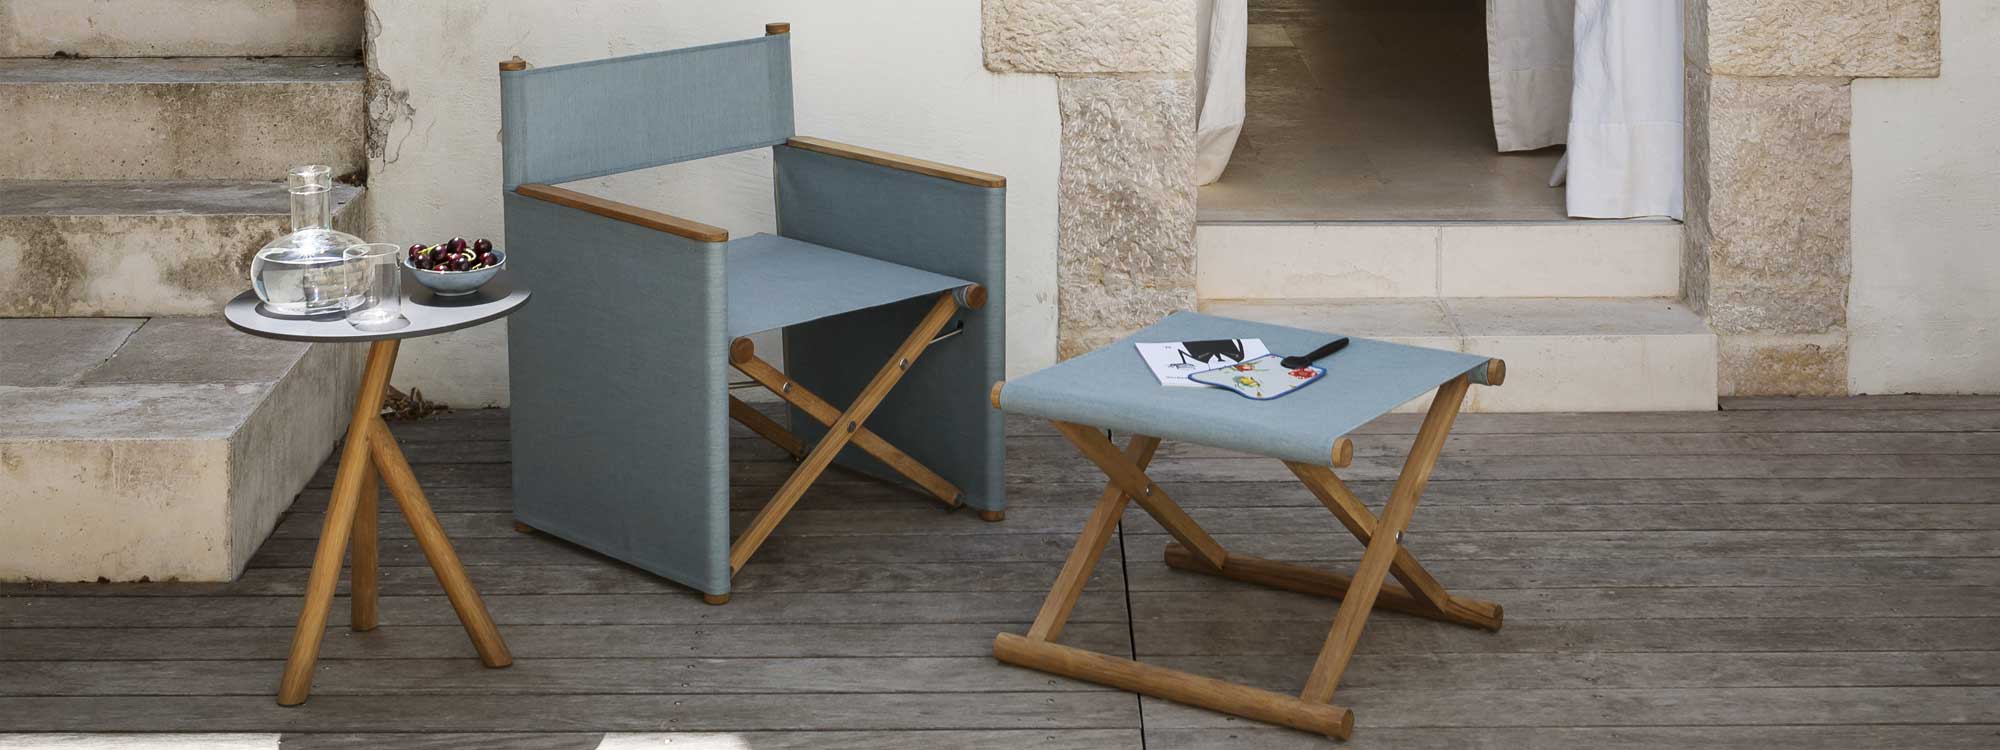 Image of RODA Orson folding garden lounge chair with folding foot rest in teak and grey Batyline, together with Stork teak side table